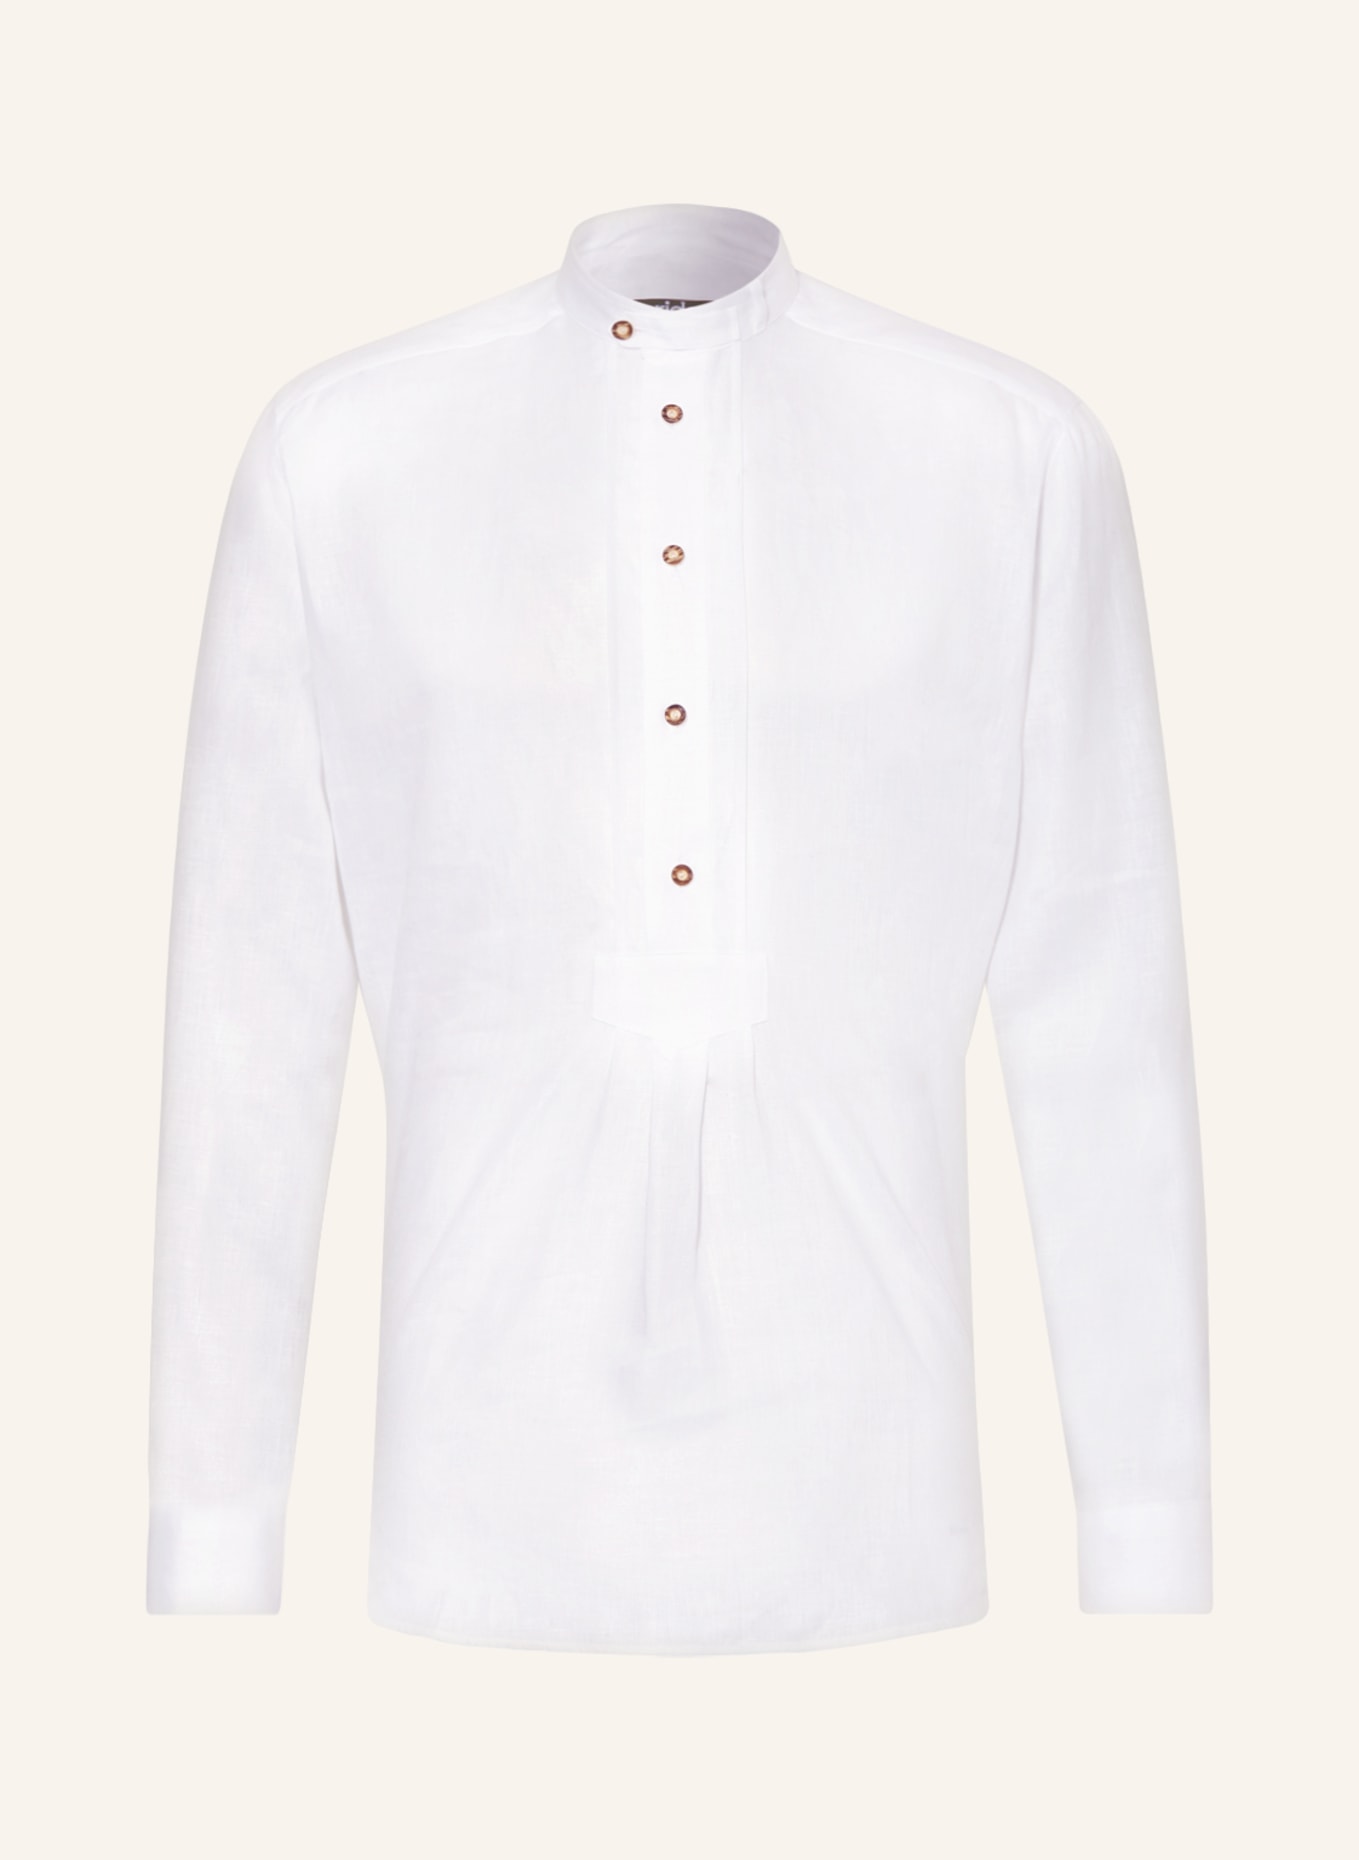 fit collar shirt with arido in white stand-up regular linen Trachten of made